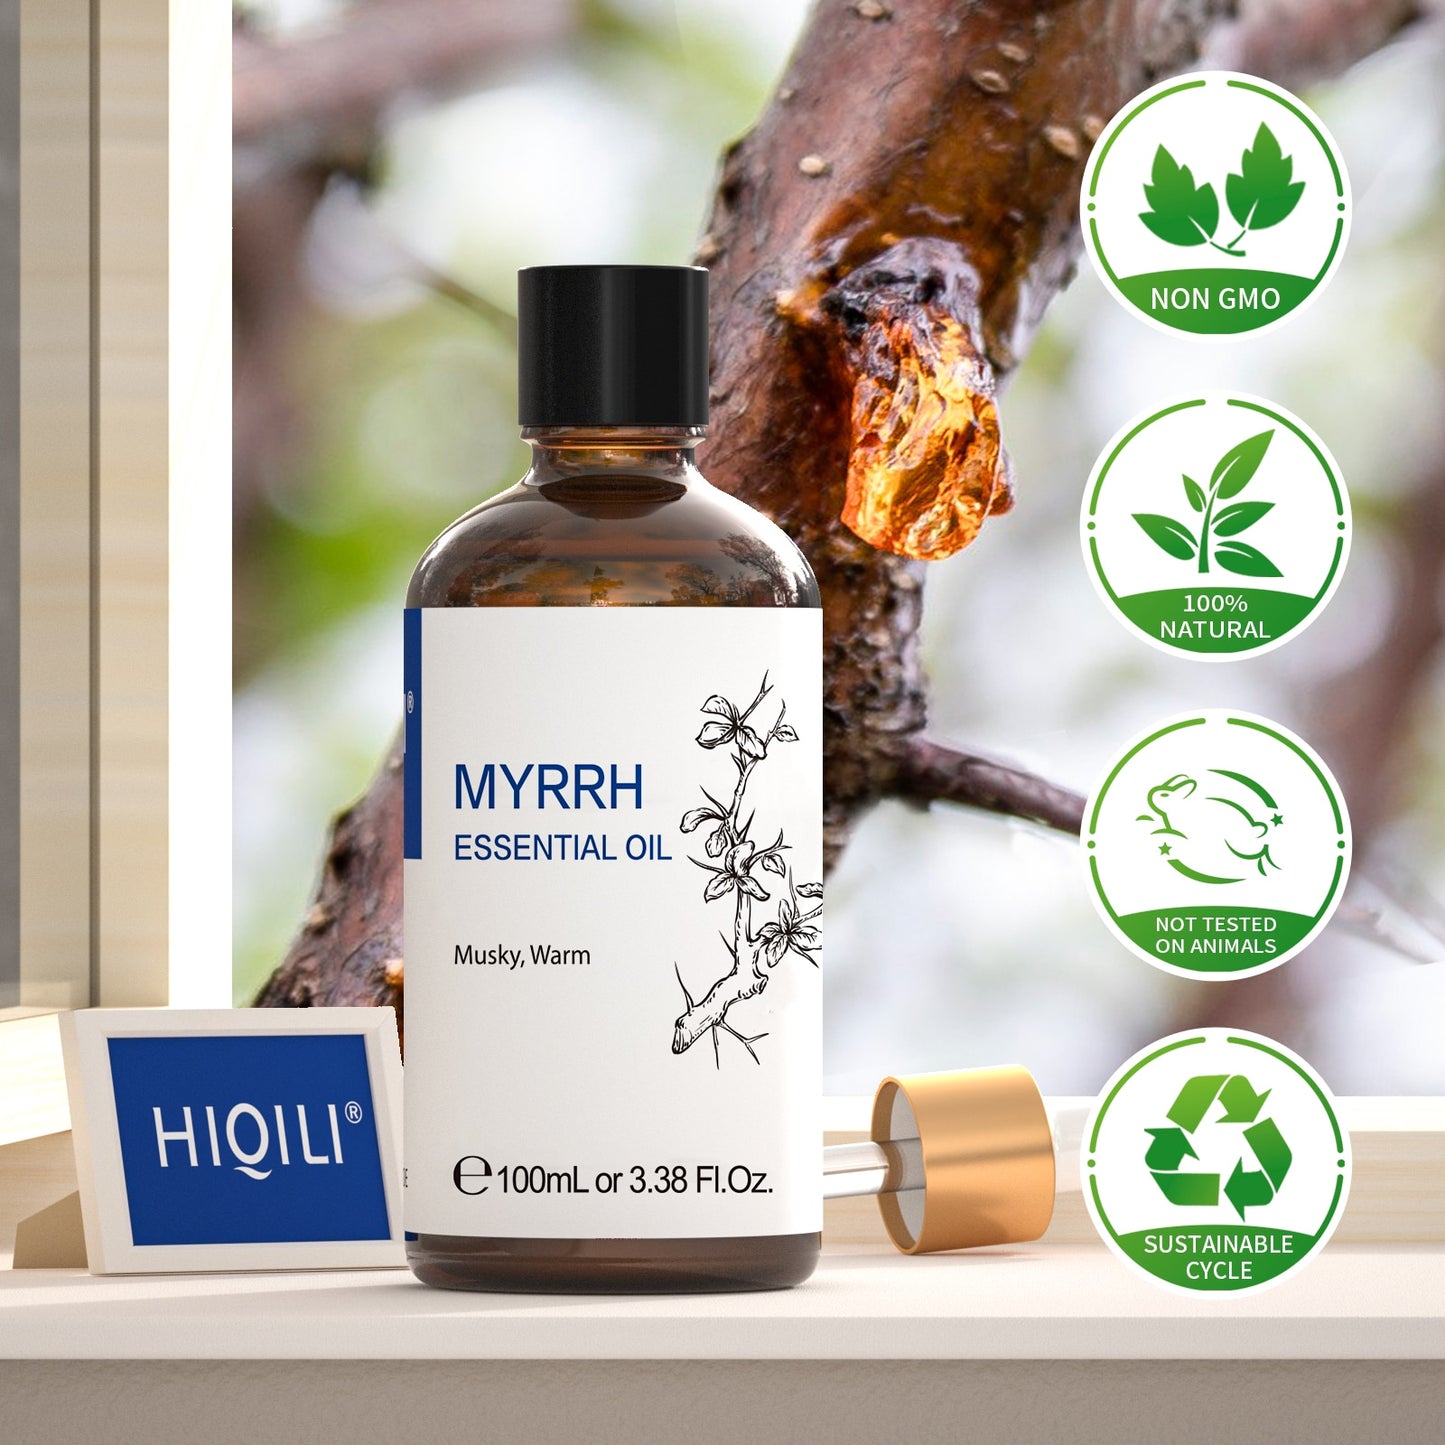 HIQILI 100ML Myrrh Essential Oils,100% Pure Nature for Aromatherapy | Used for Diffuser，Humidifier，Massage | Clean Skin - youronestopstore23